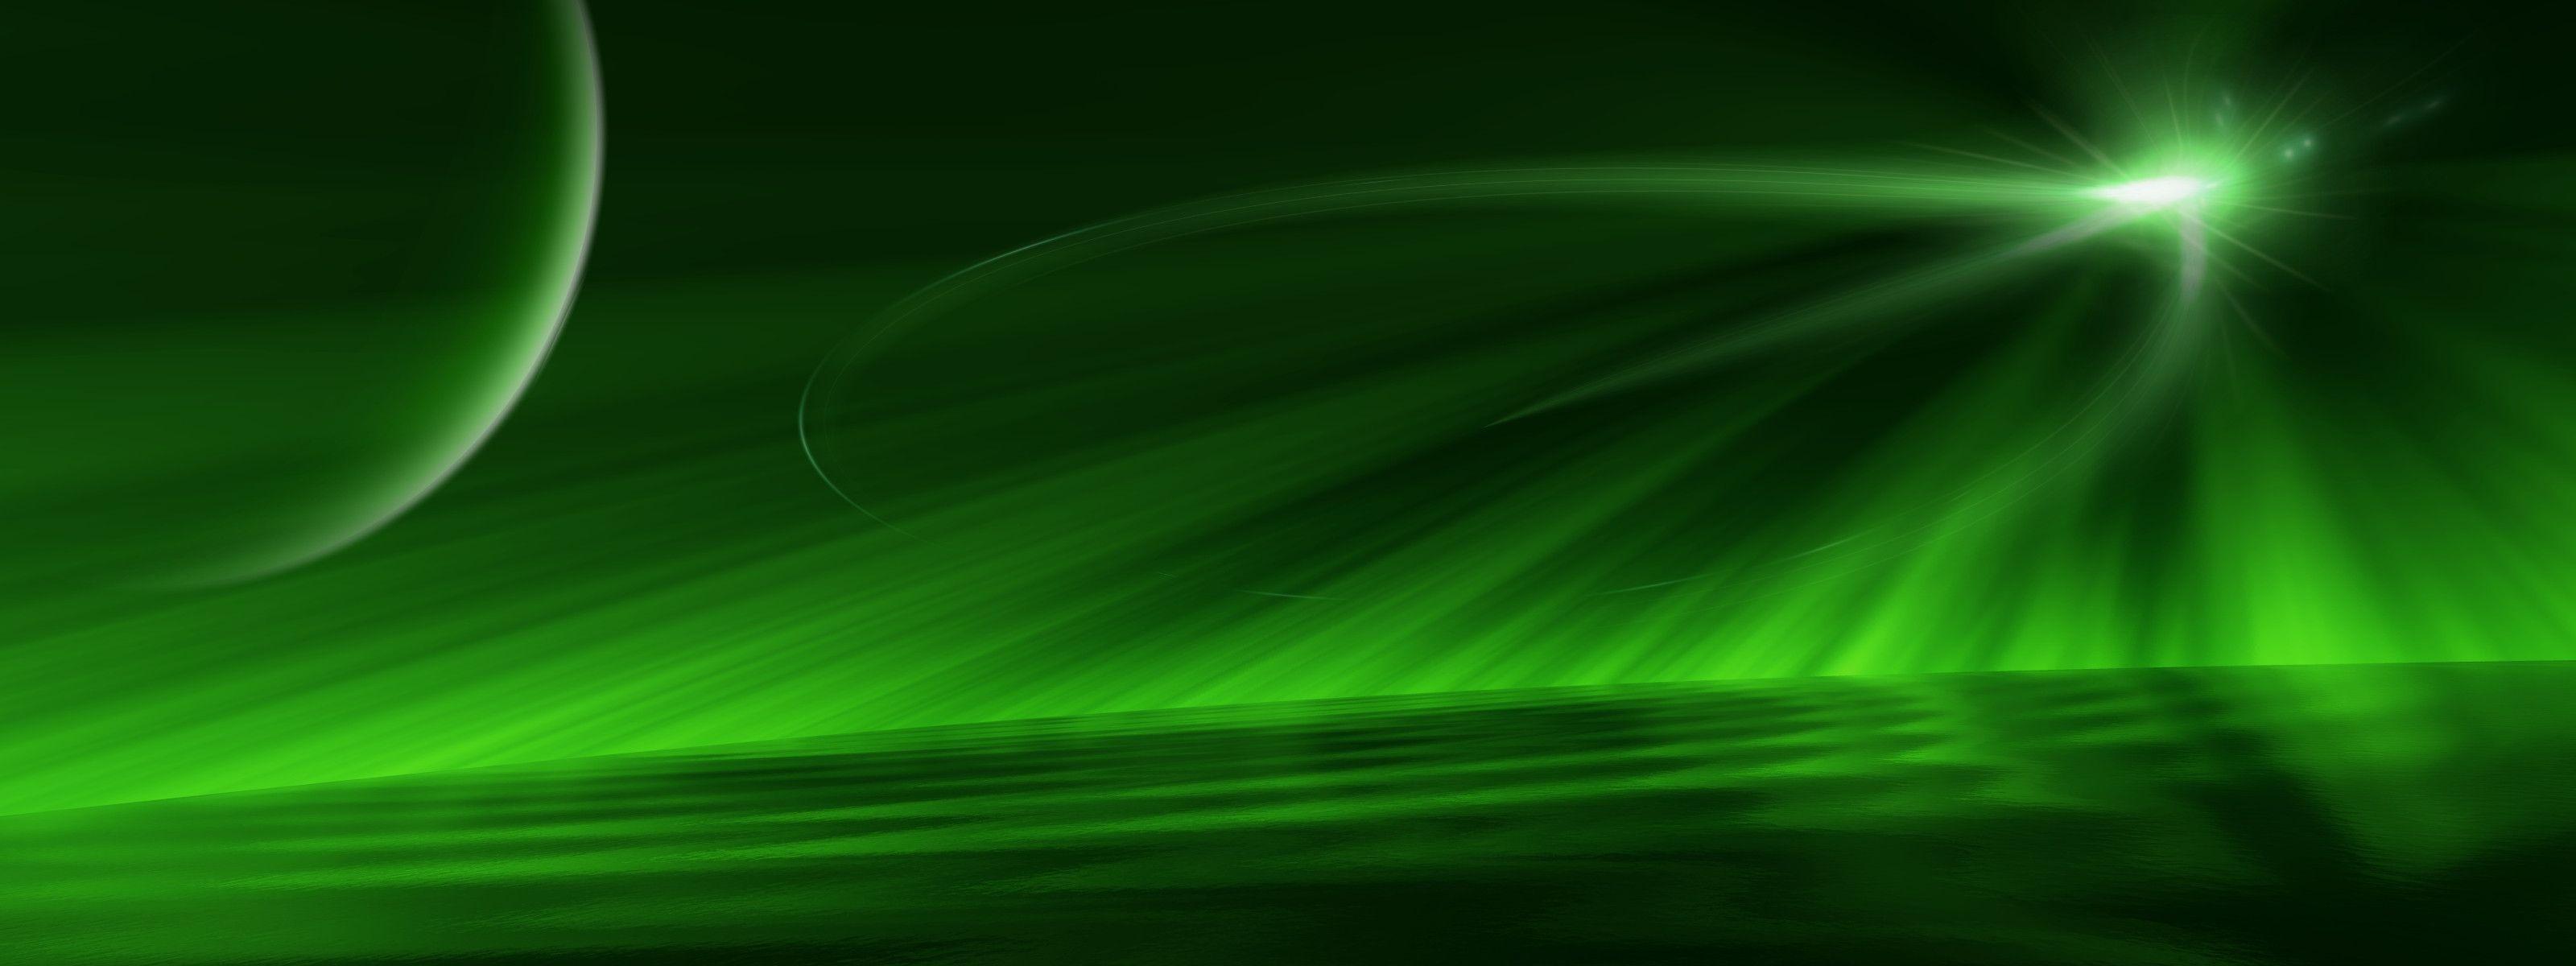 Best Green Screen Background Images ~ Green Screen Backgrounds Free ...